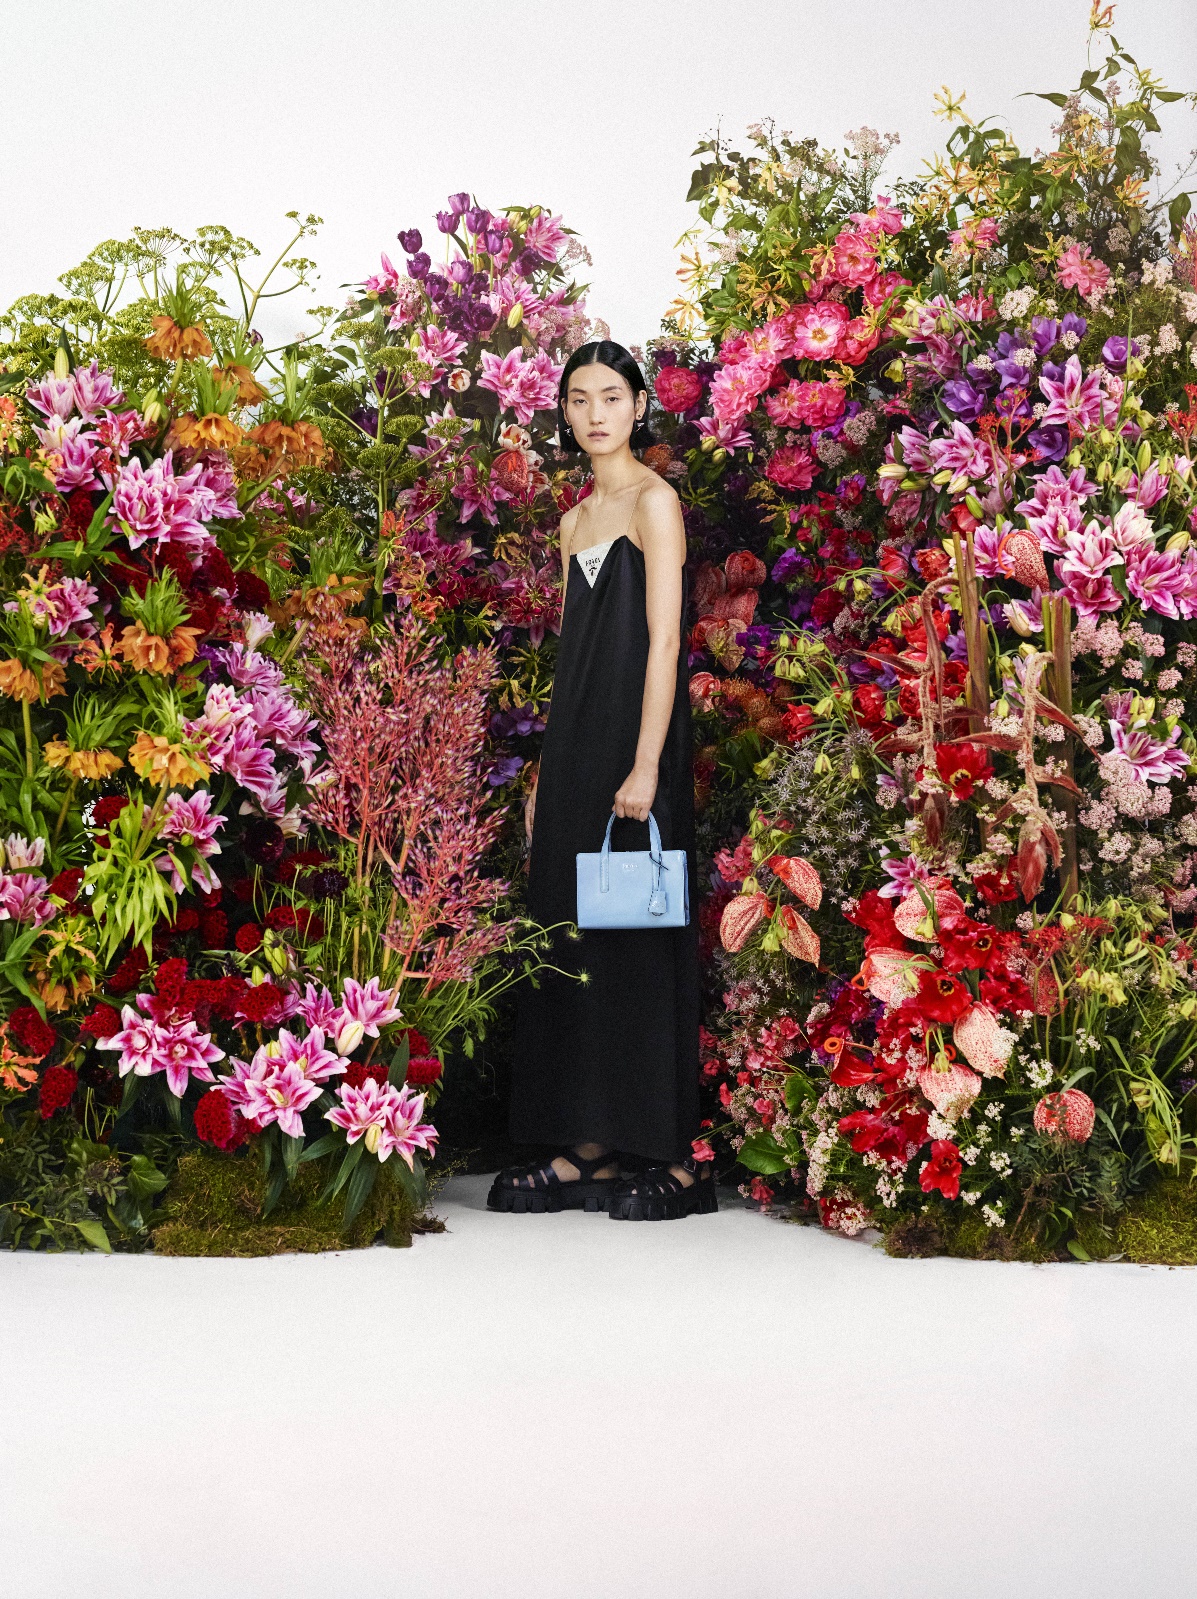 A person standing in front of a bush of flowers

Description automatically generated with medium confidence